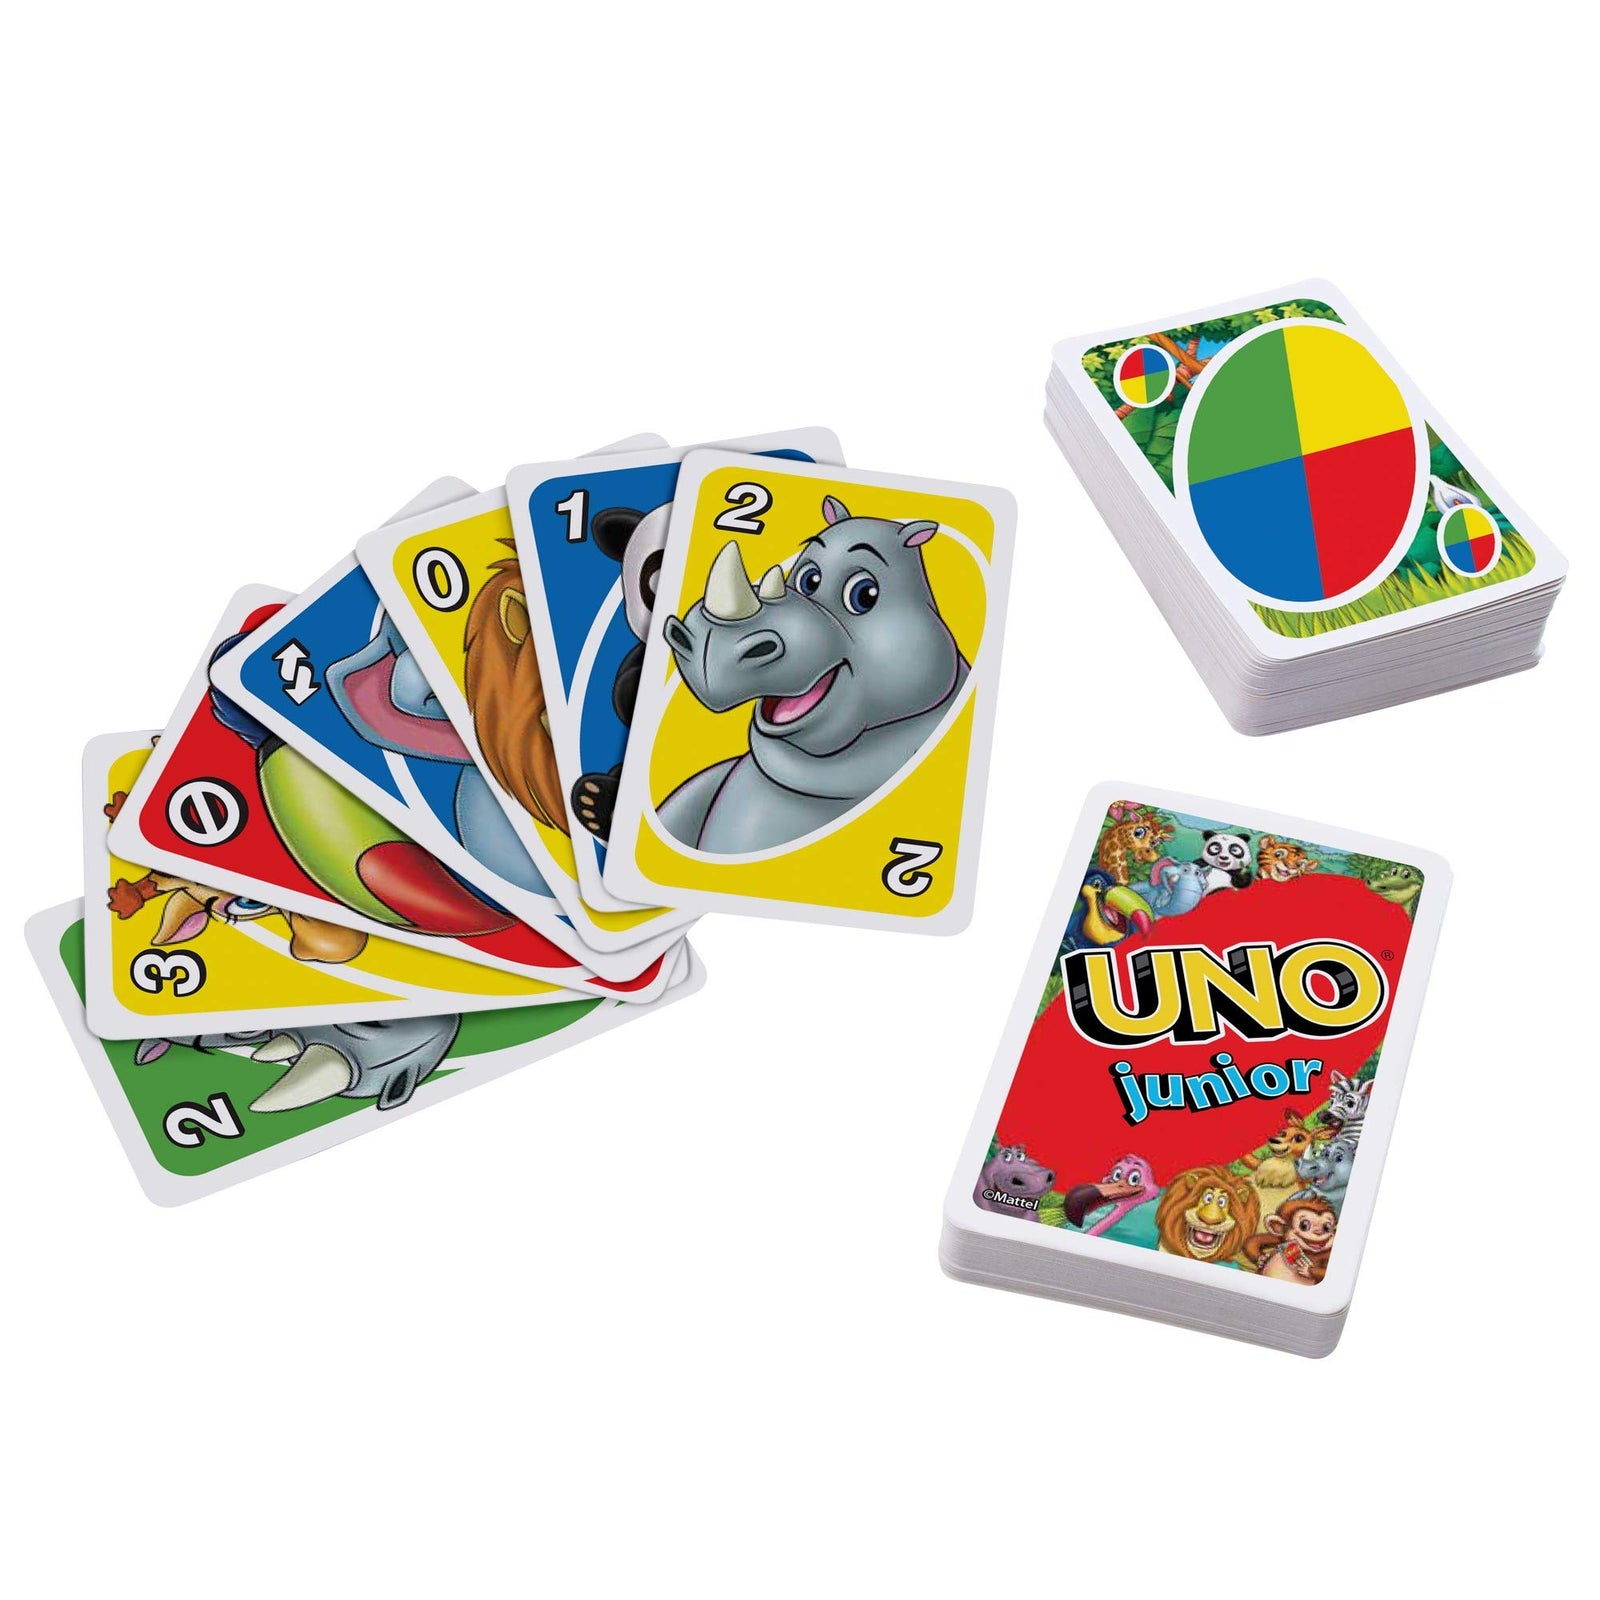 Mattel UNO Junior Card Game with 45 Cards, Gift for Kids 3 Years Old & Up